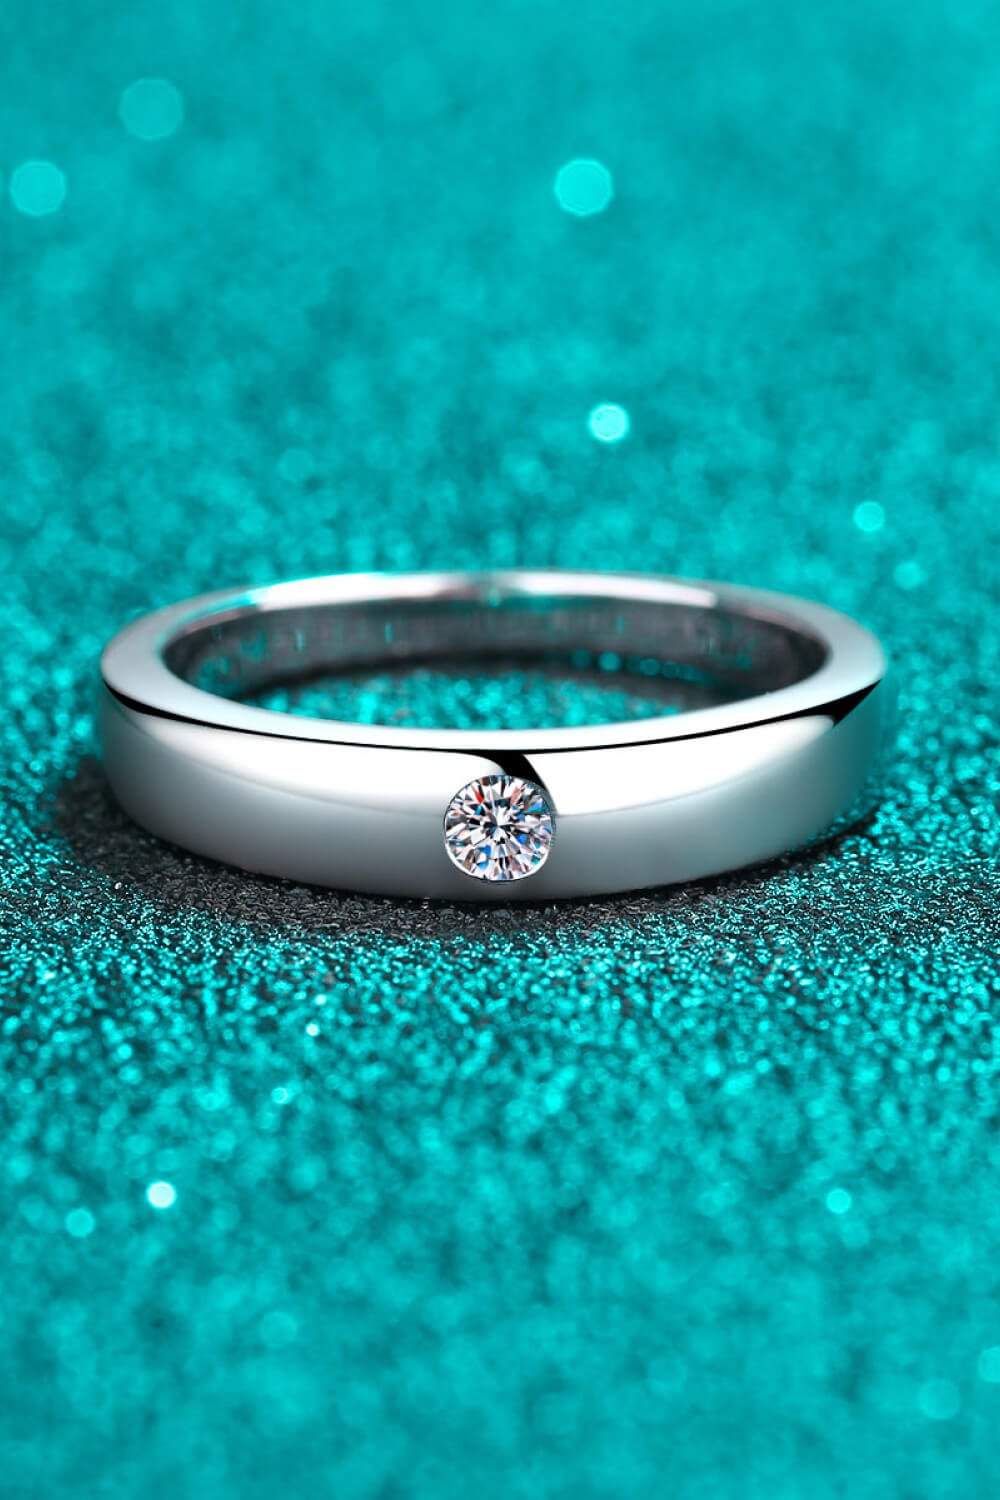 Silver Inlaid Moissanite Band RingRingBeach Rose Co.